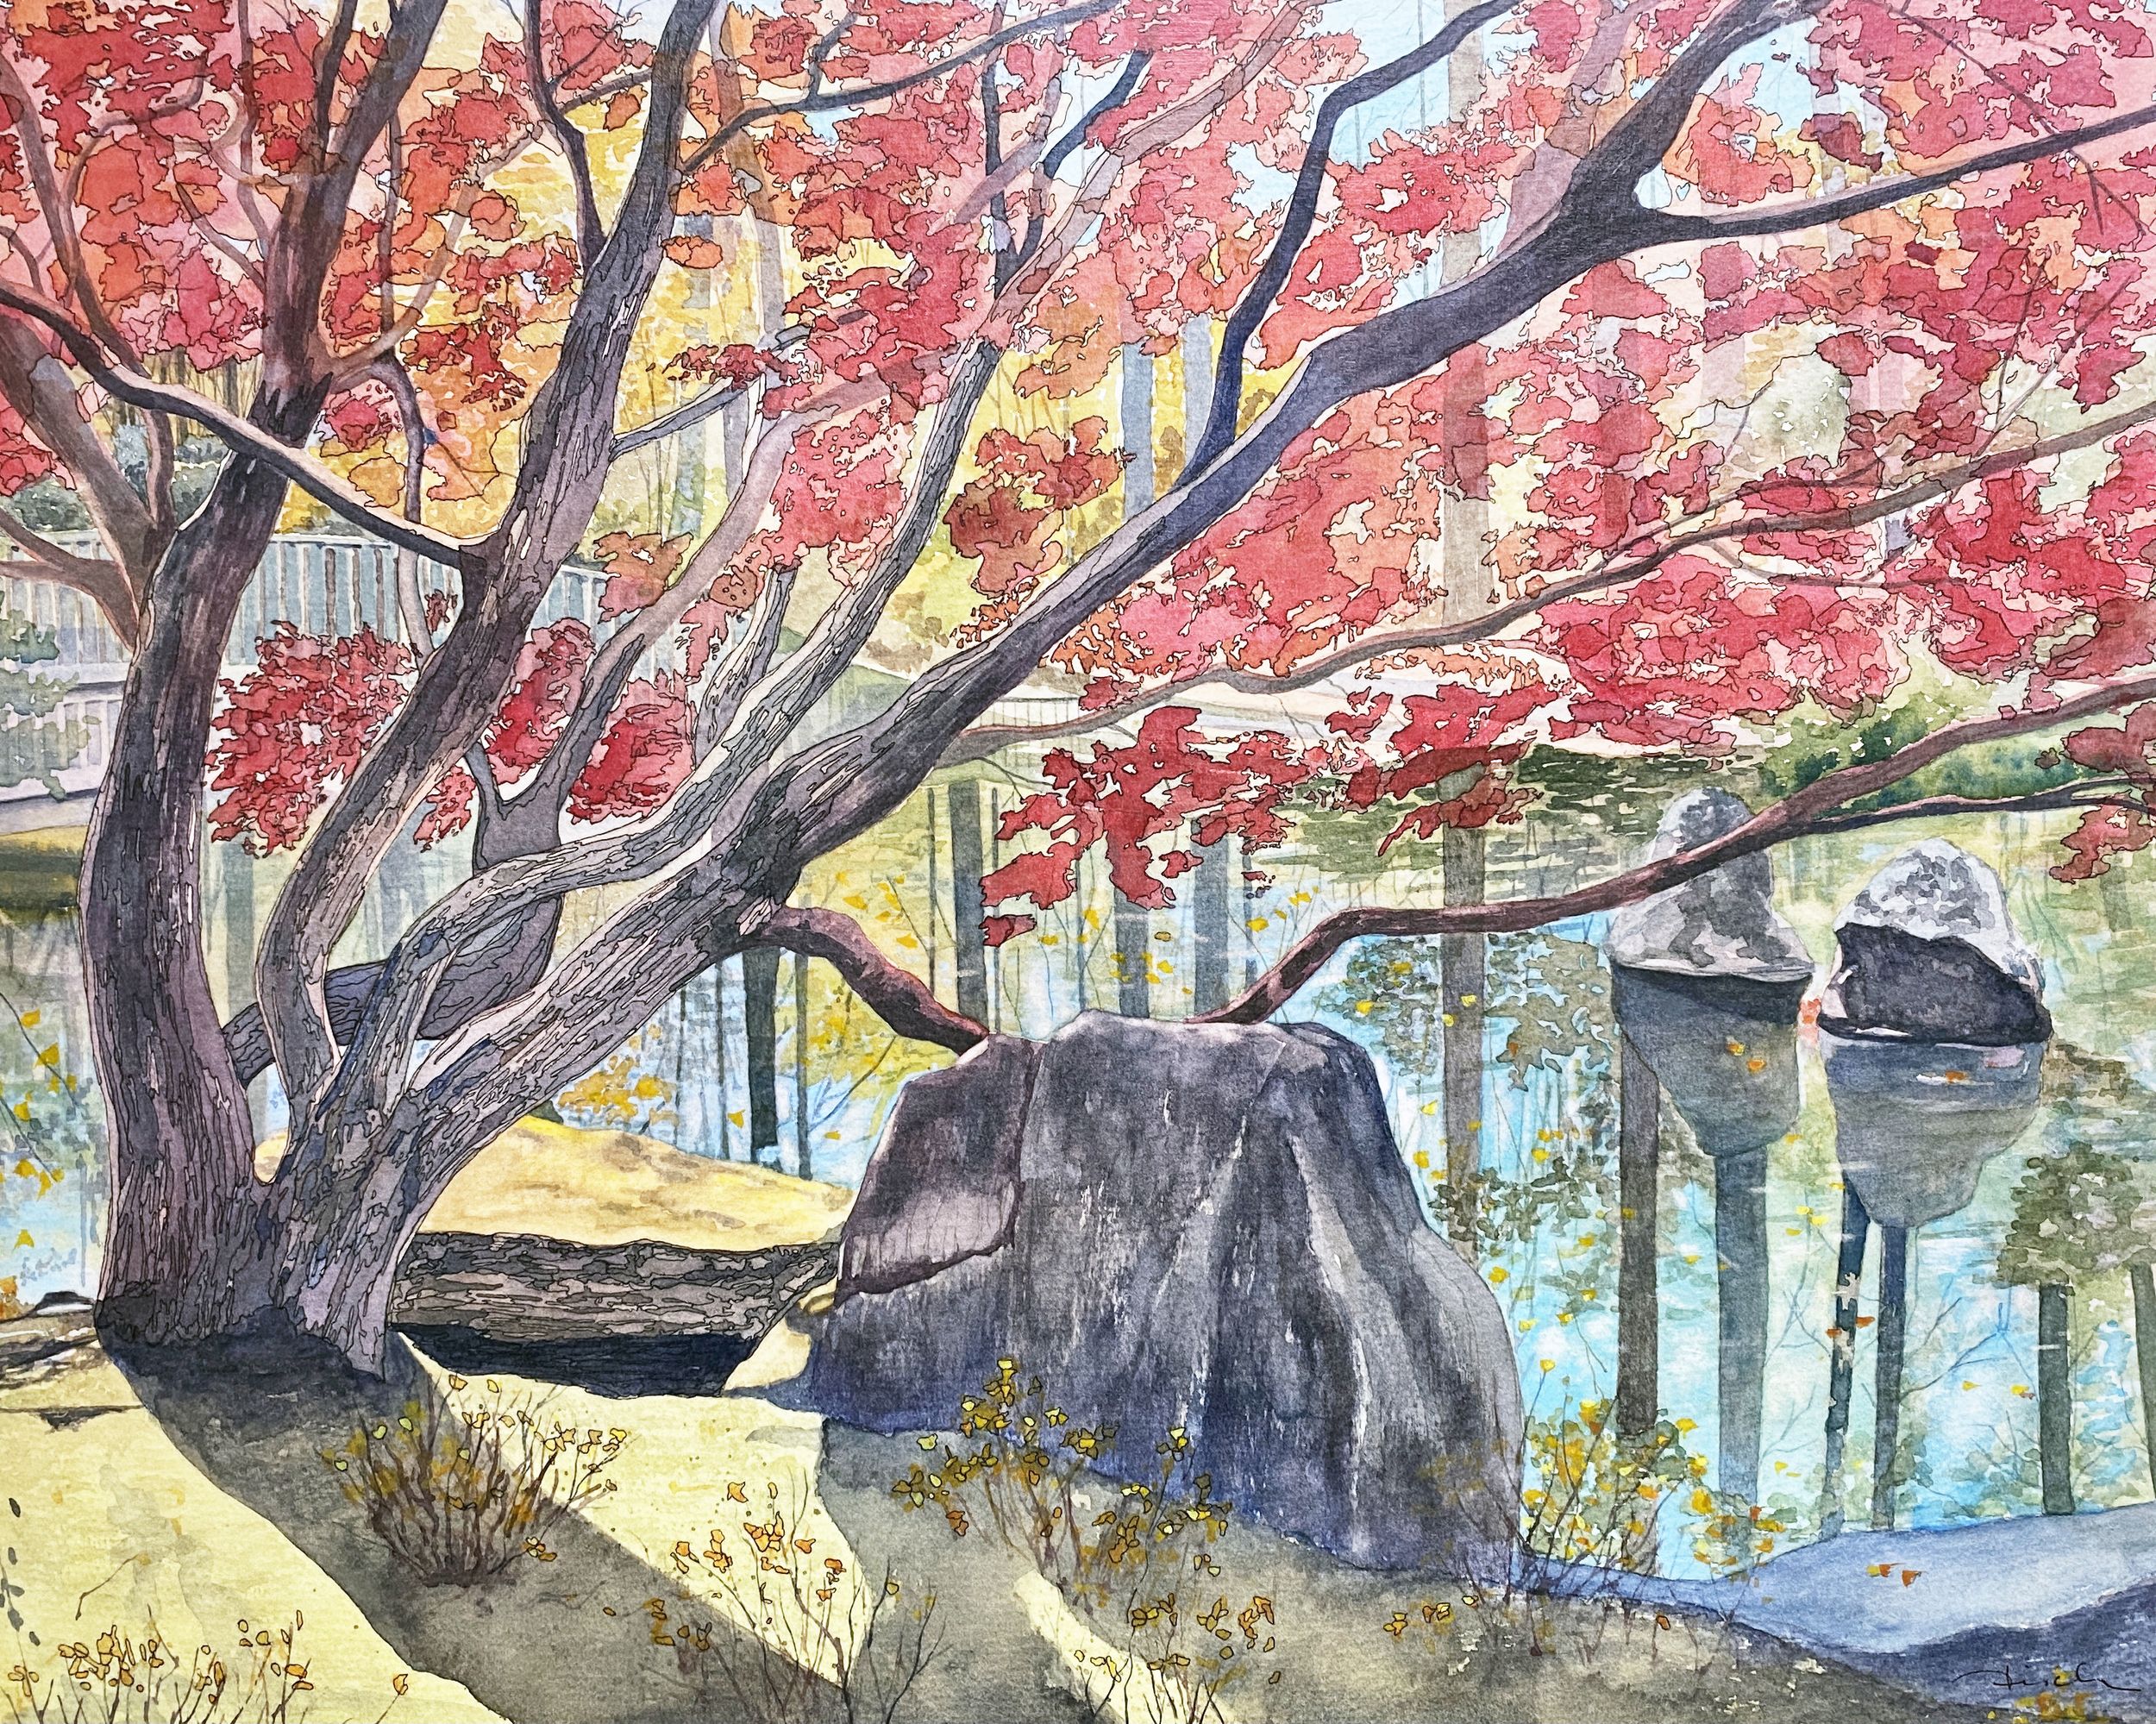 Spokane Watercolor Society To Open In-Person Exhibition With Mac | The Spokesman-Review